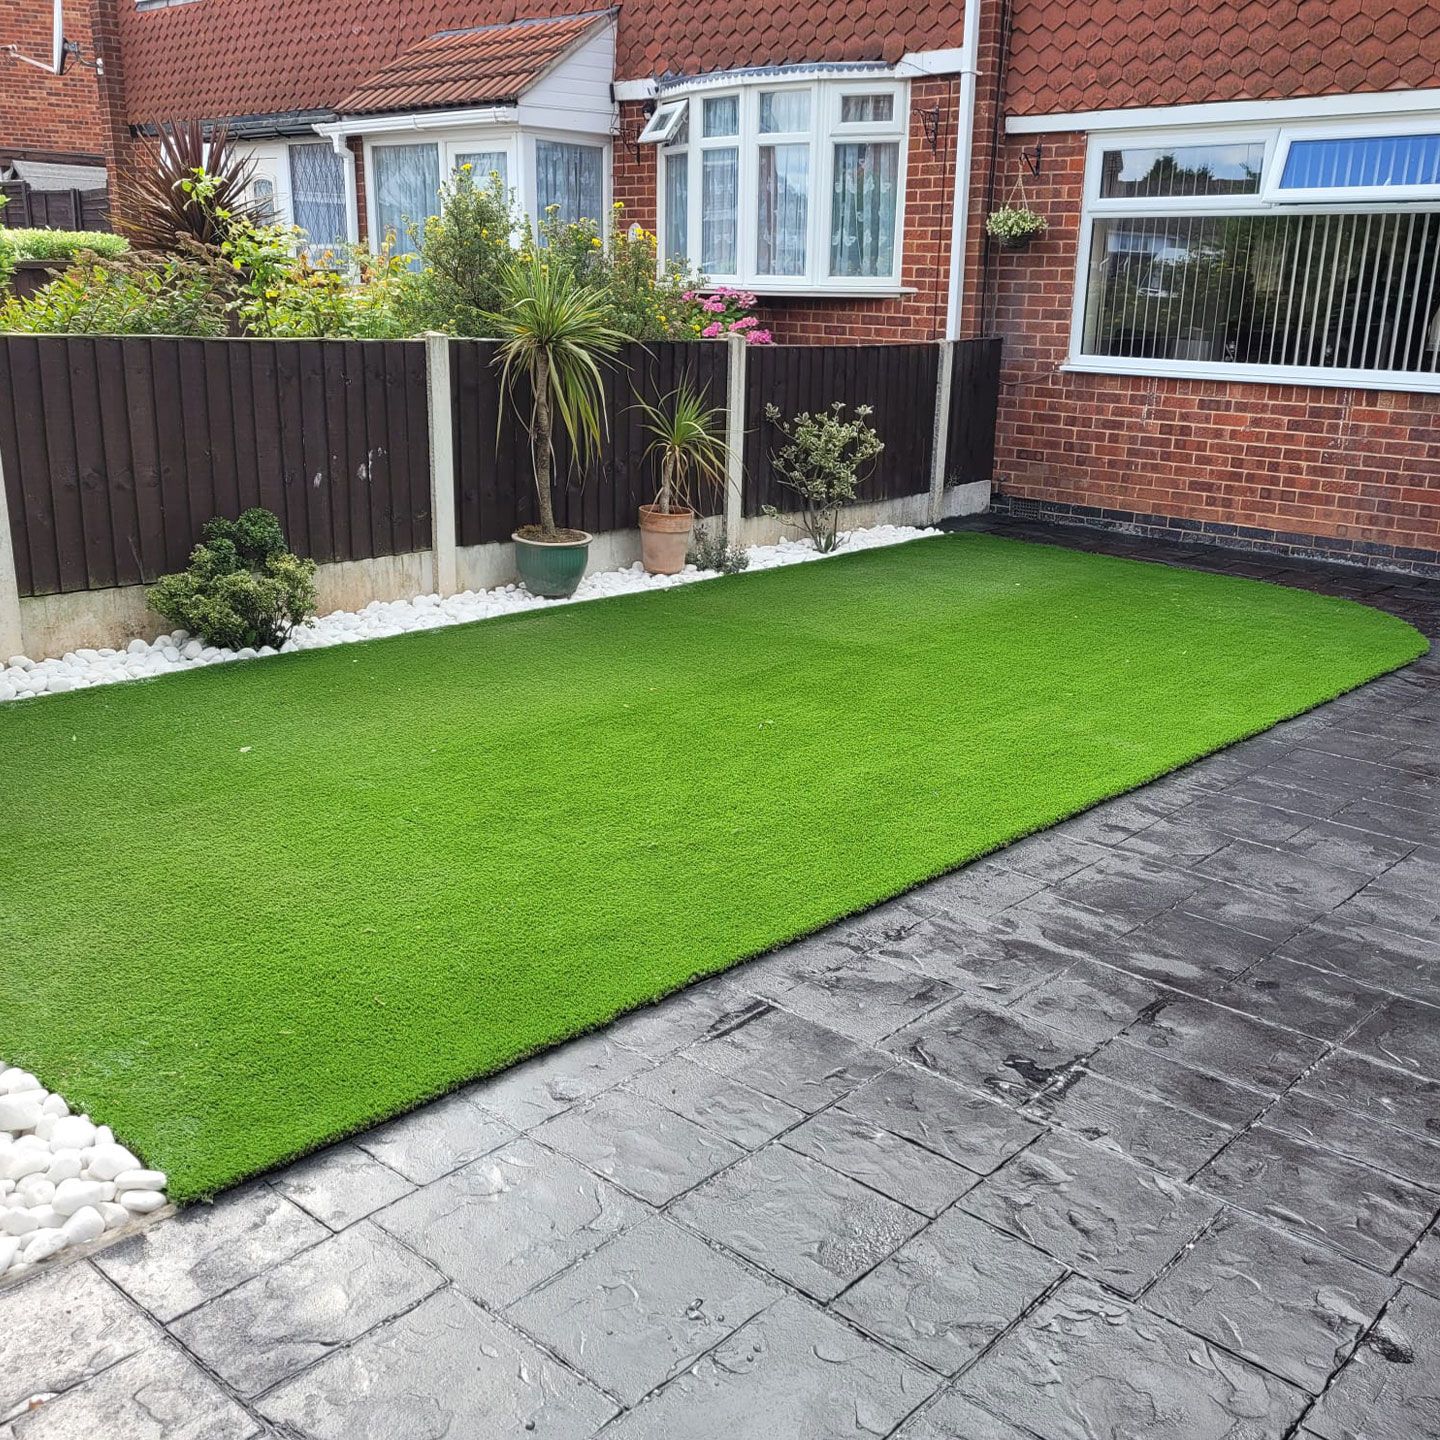 landscaping in Long Itchington showing new artificial grass and patterned concrete paving